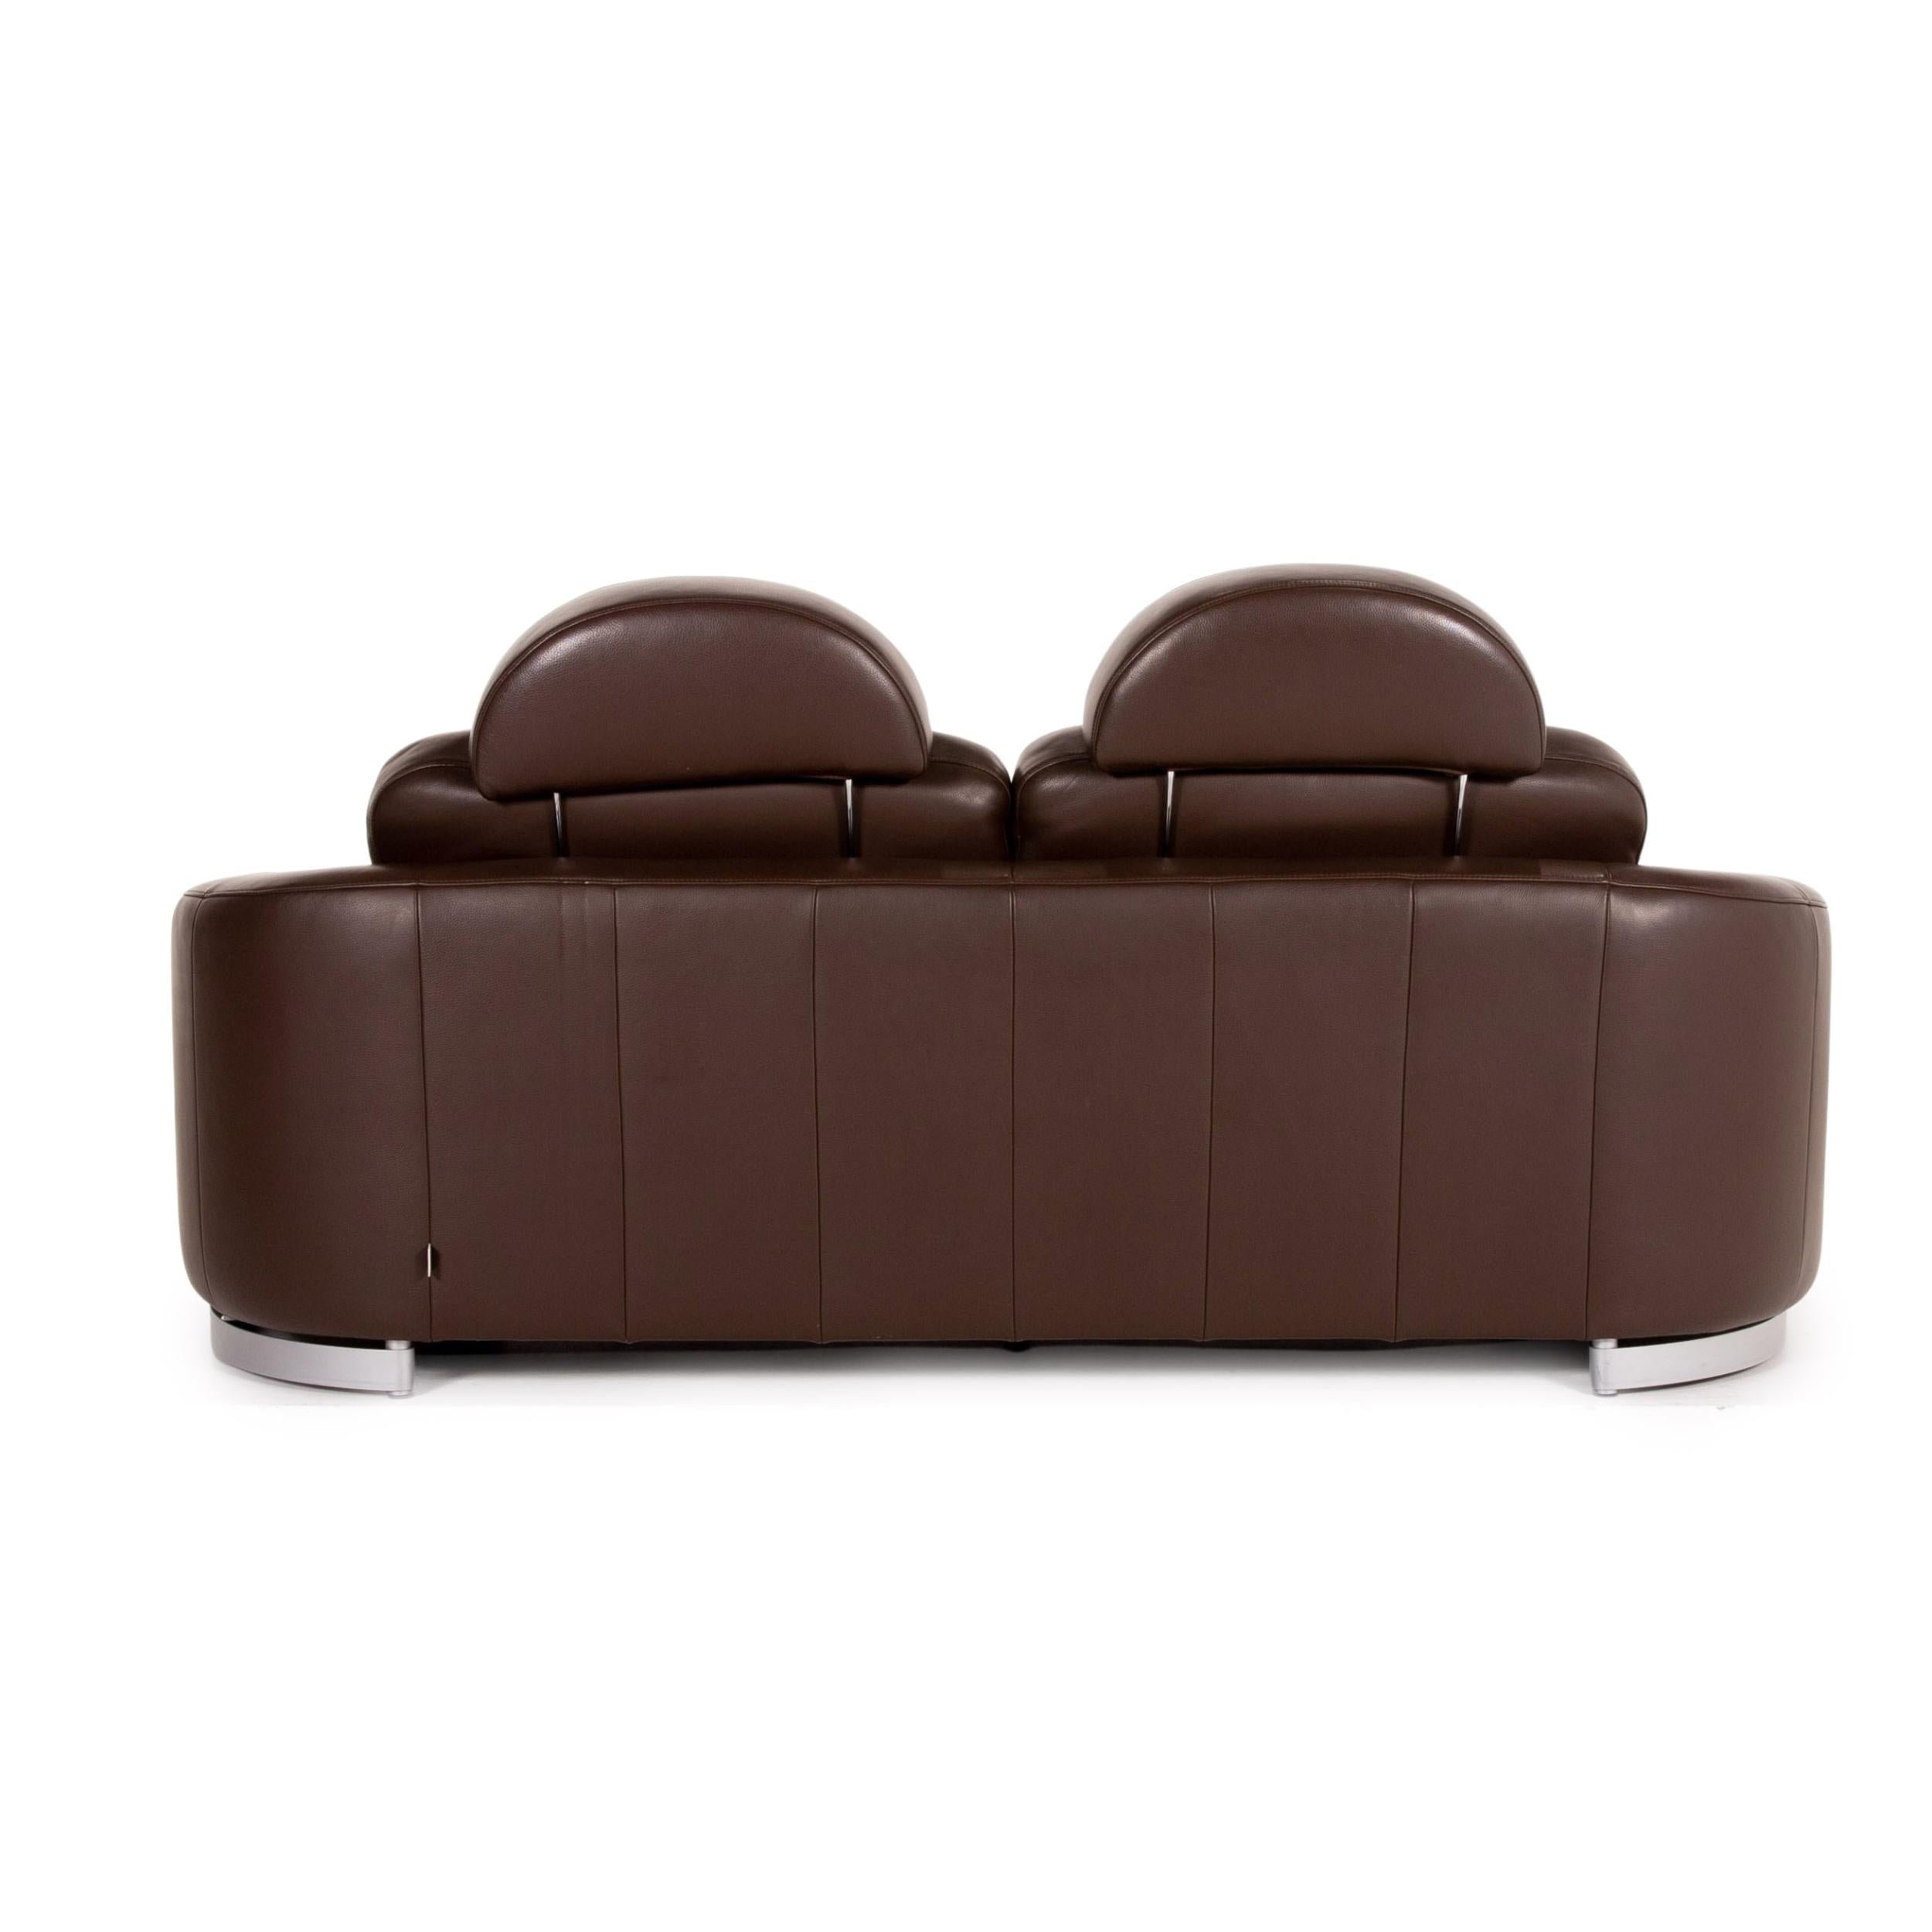 Ewald Schillig Leather Sofa Set Brown Dark Brown 2x Two-Seater For Sale 12